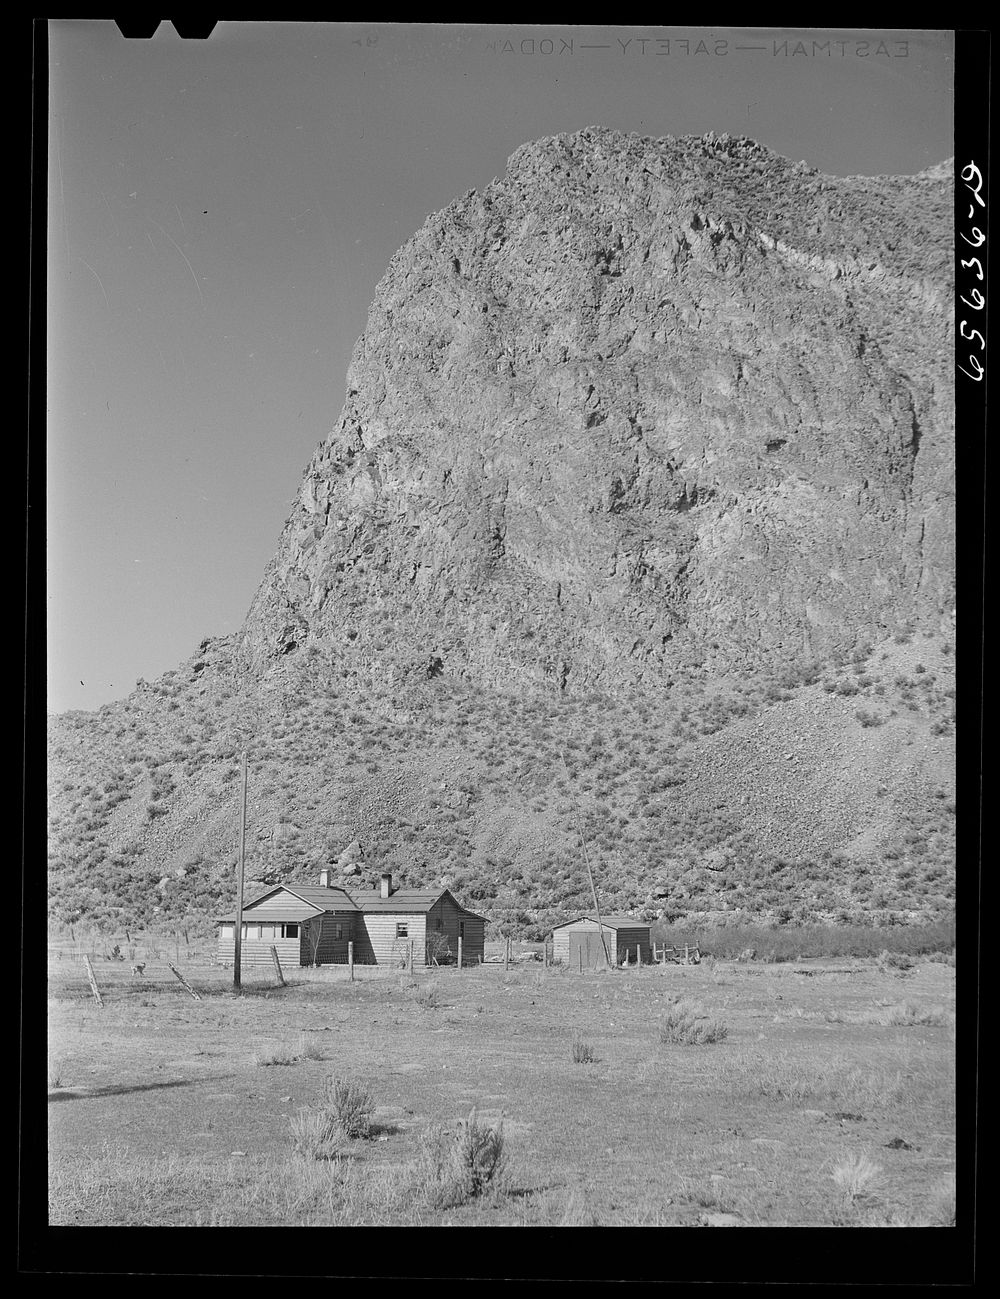 Beaverhead County, Montana. Cabin at the foot of a mountain. Sourced from the Library of Congress.